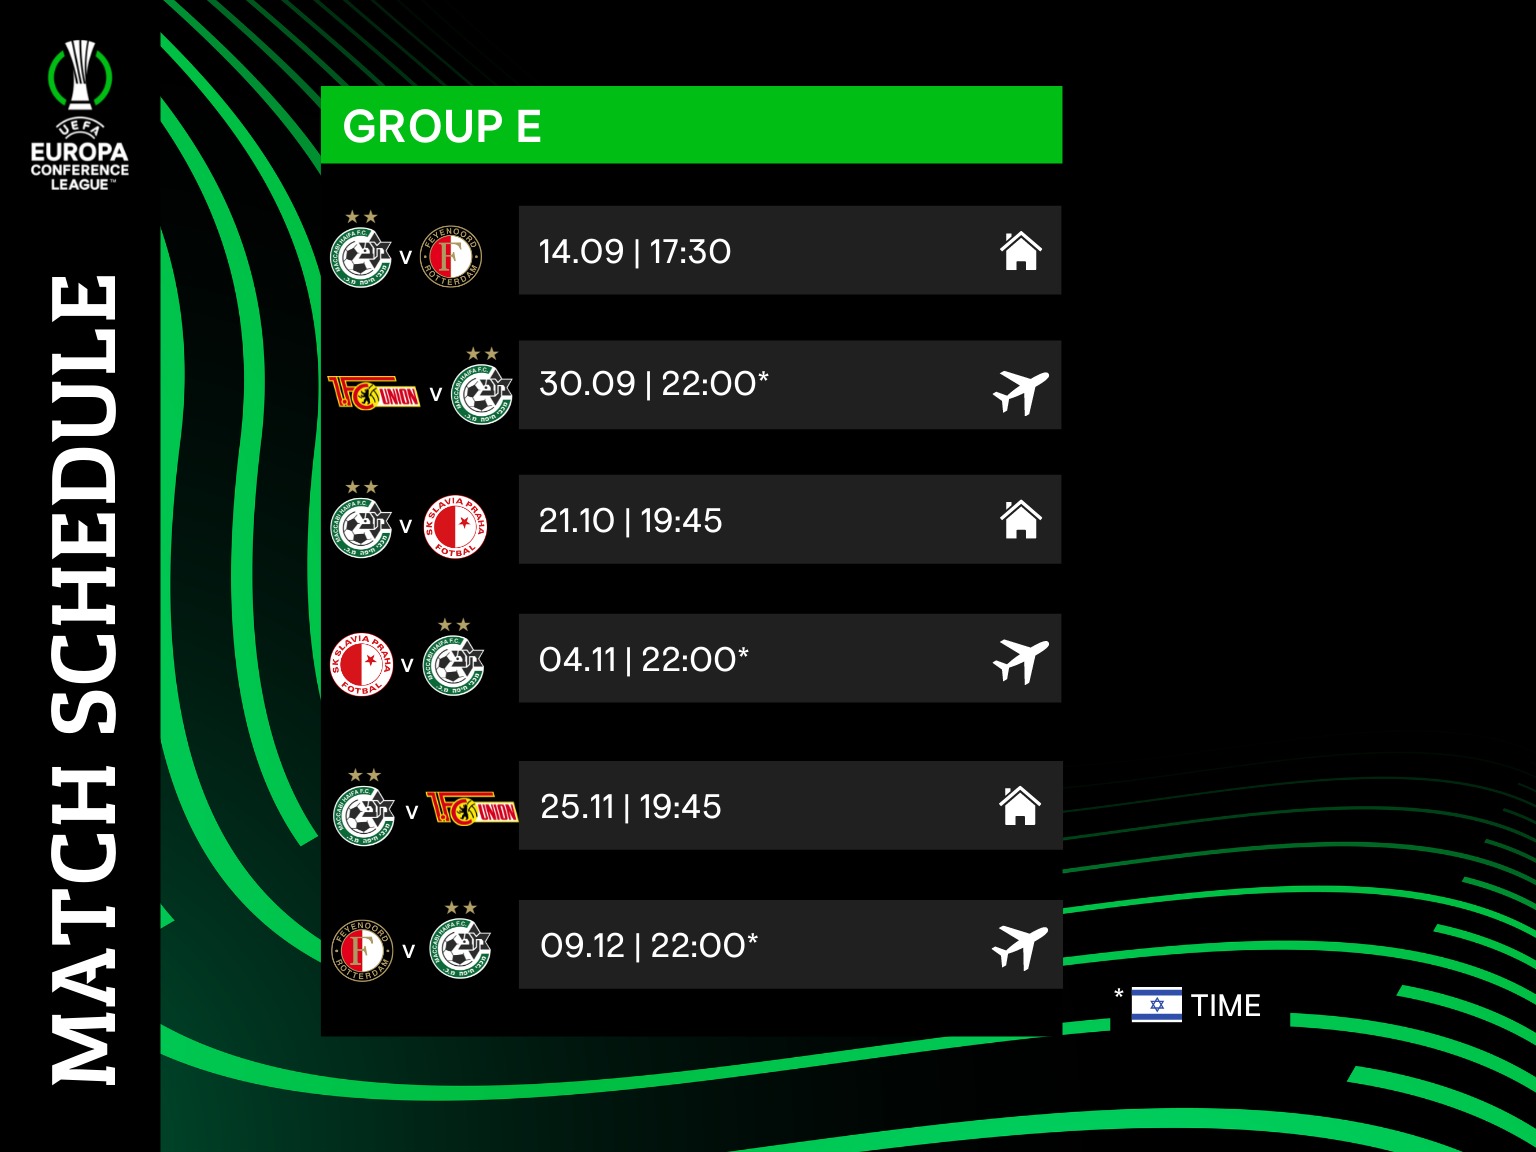 UECL's group stage schedule